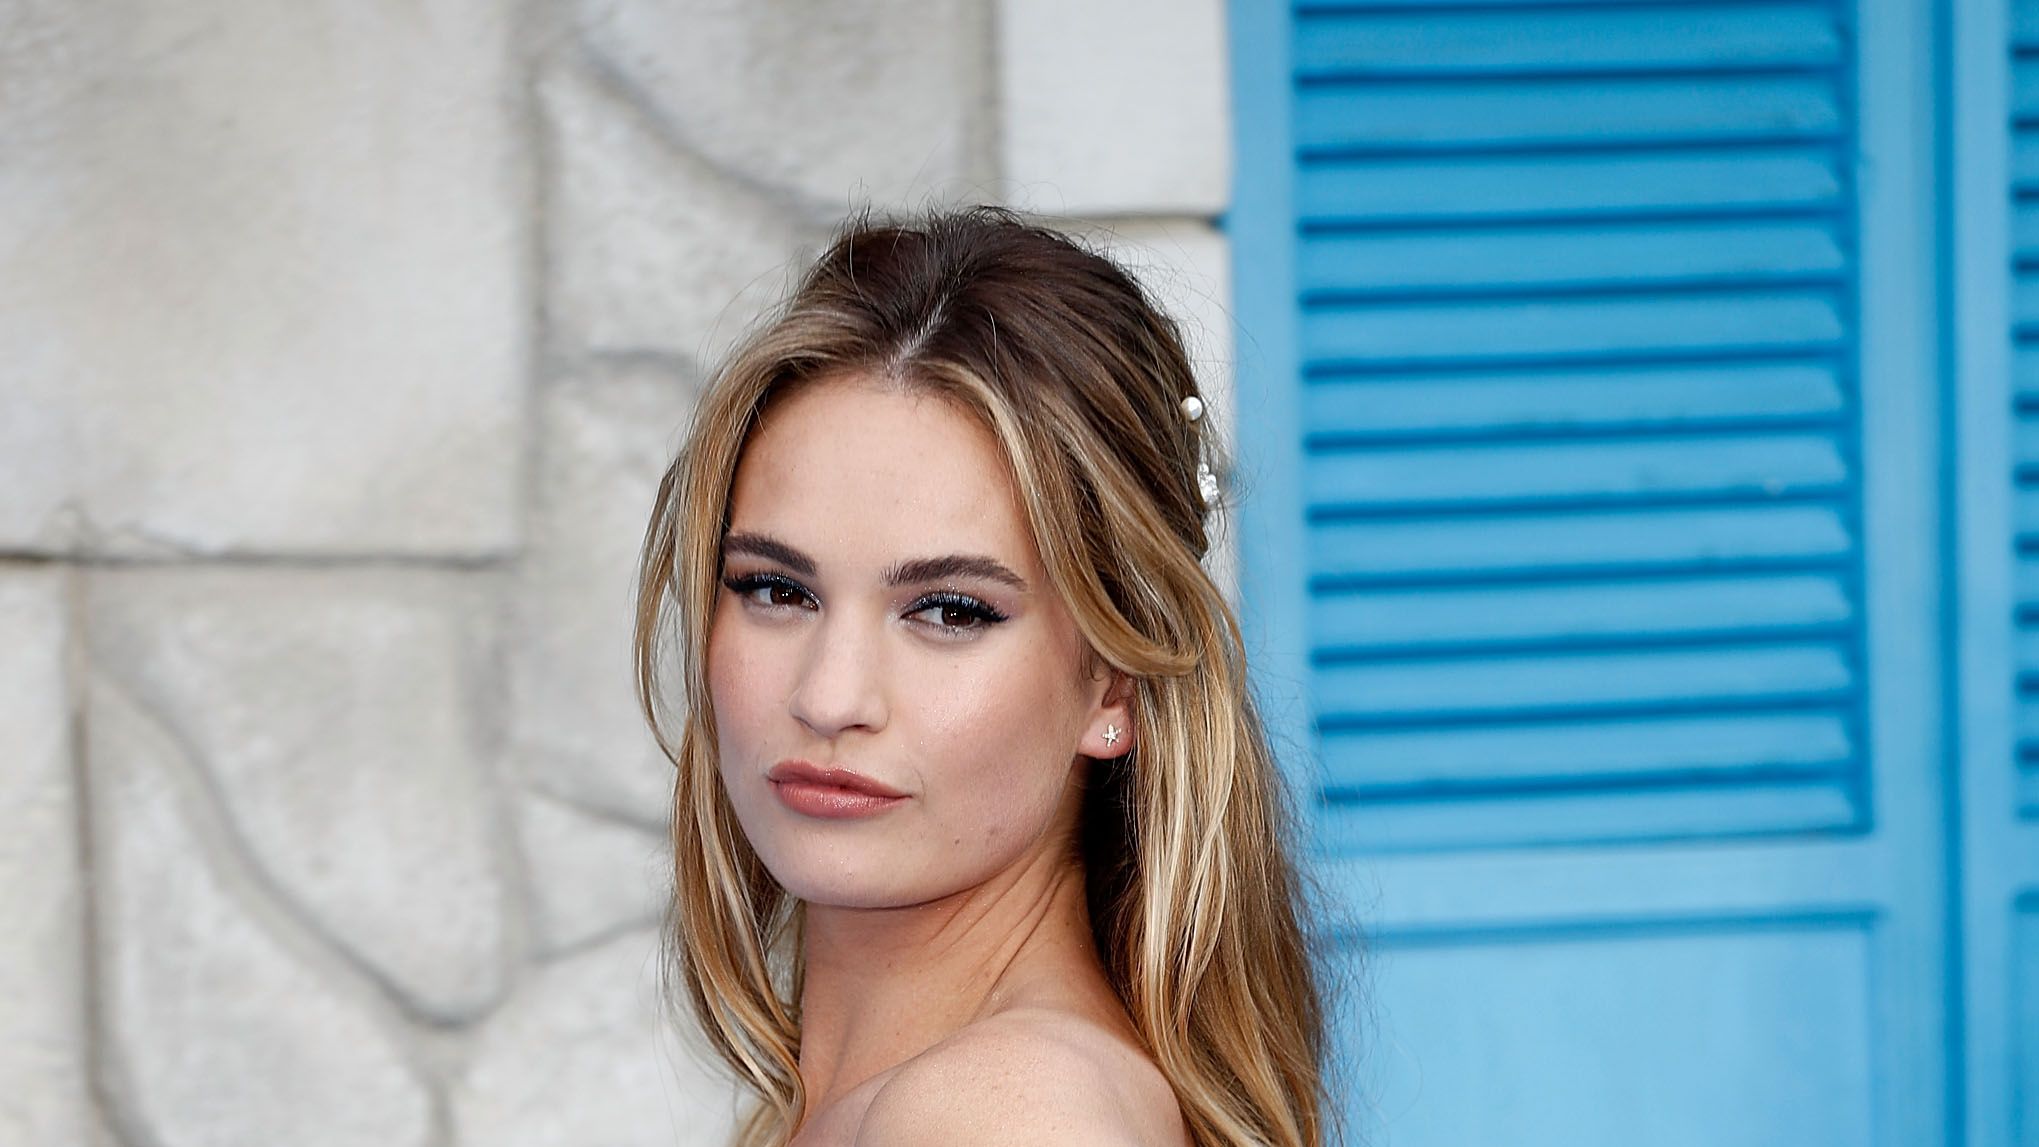 Hollywood Celebrities Incest Sex Videos - Who Is Lily James? - Meet the Actress Who Sparked Chris Evans Dating Rumors